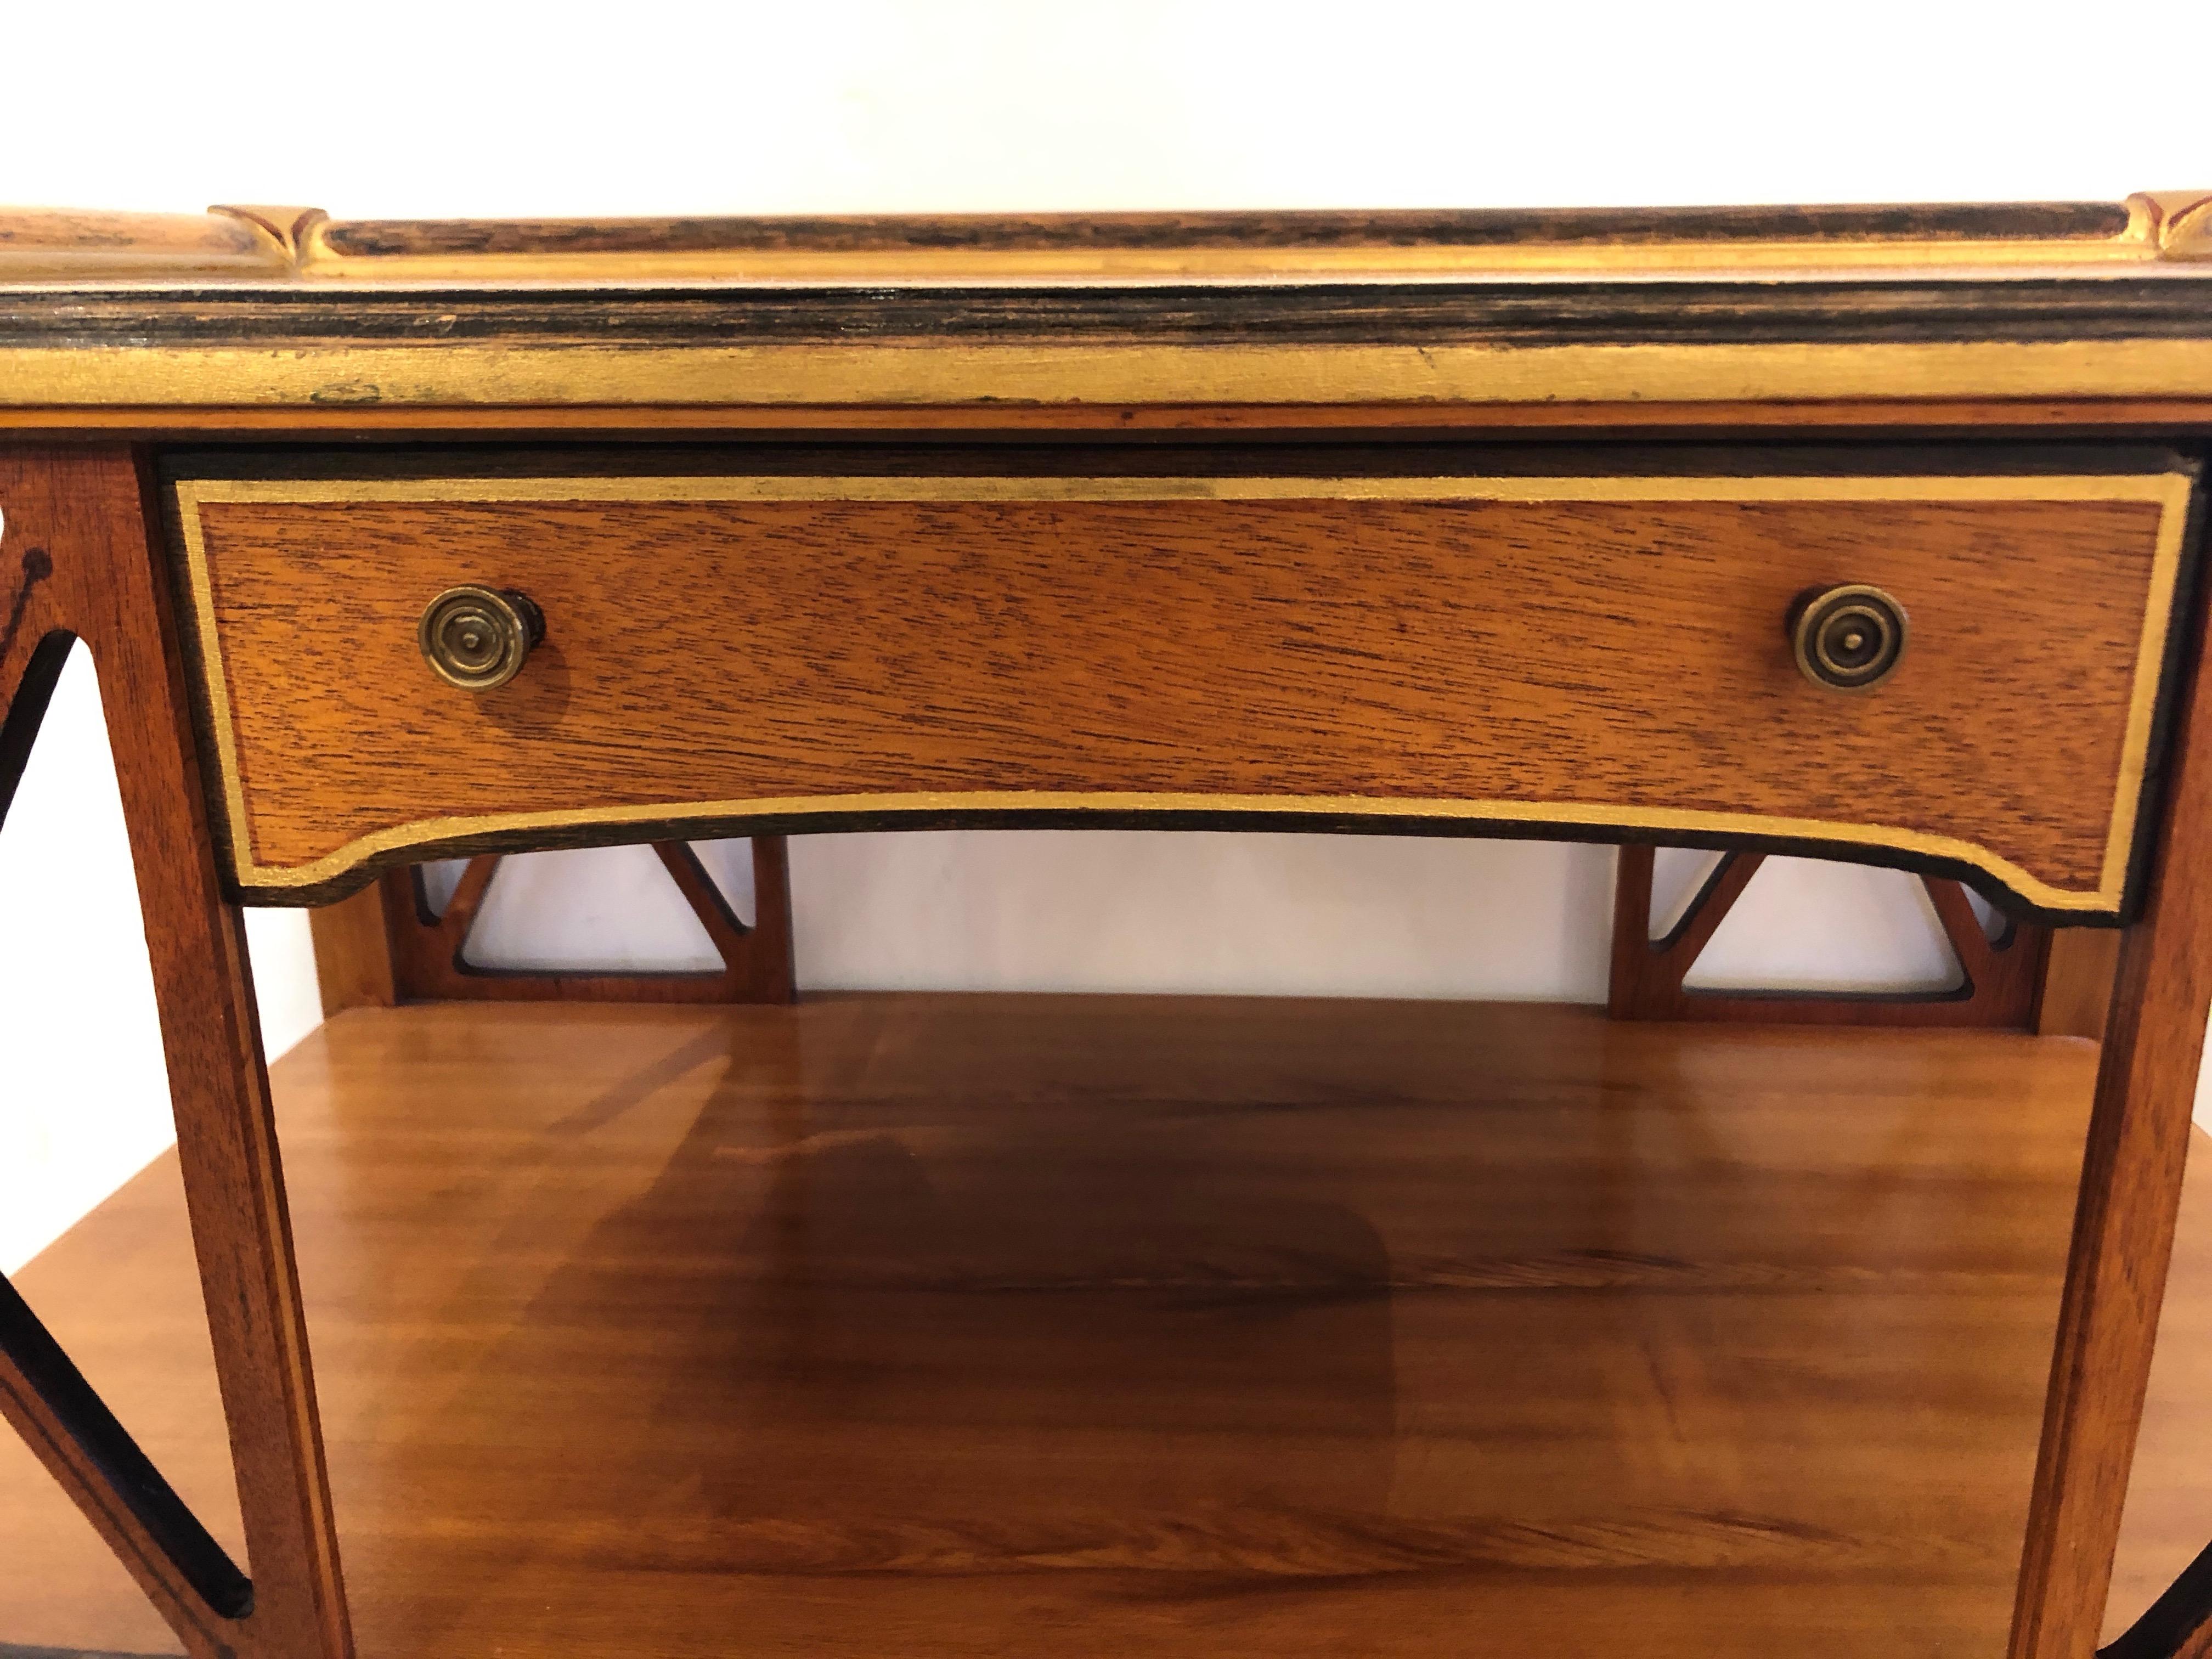 A very elegant neoclassical style side table having light brown wood offset with ebonized and painted sections as well as gold leaf. There are stunning X's on the front and back, elegant tapered legs, a single drawer, and unusual brass decorative